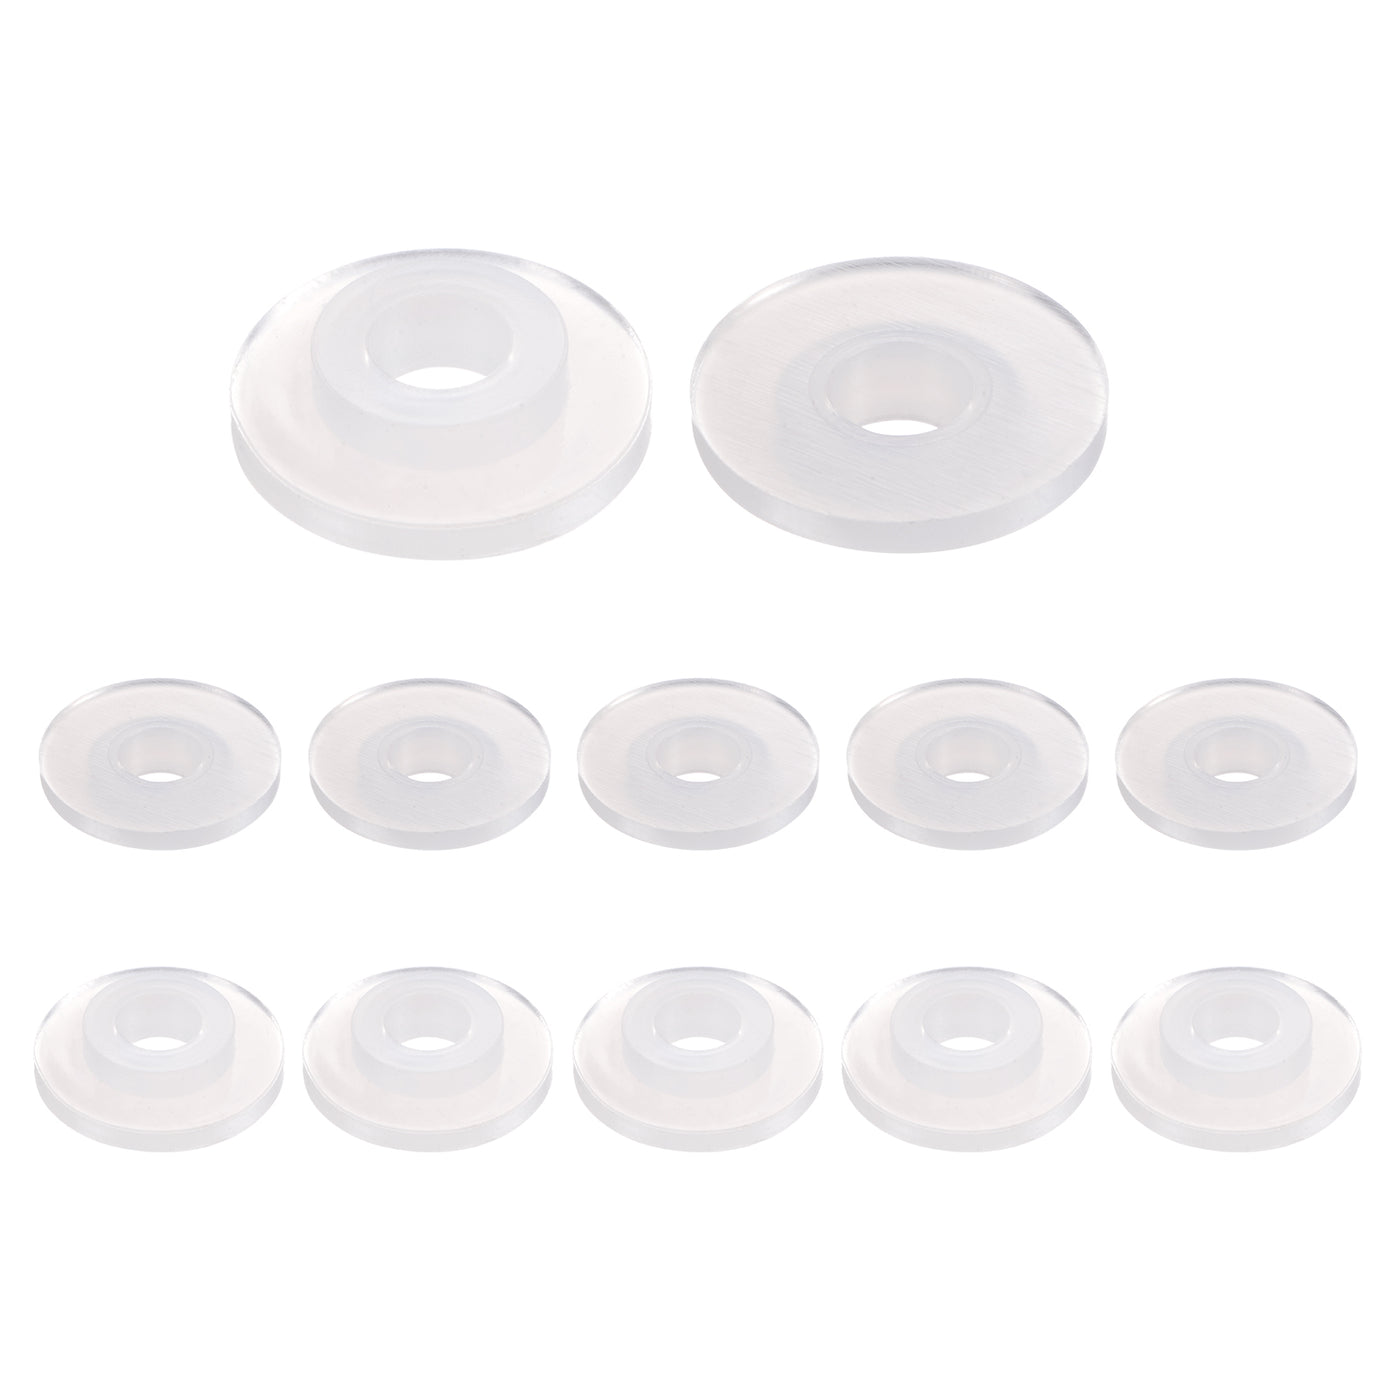 uxcell Uxcell 12pcs Flanged Sleeve Bearings 6.2mm ID 11.16mm OD 4.5mm L, Nylon Bushings, White